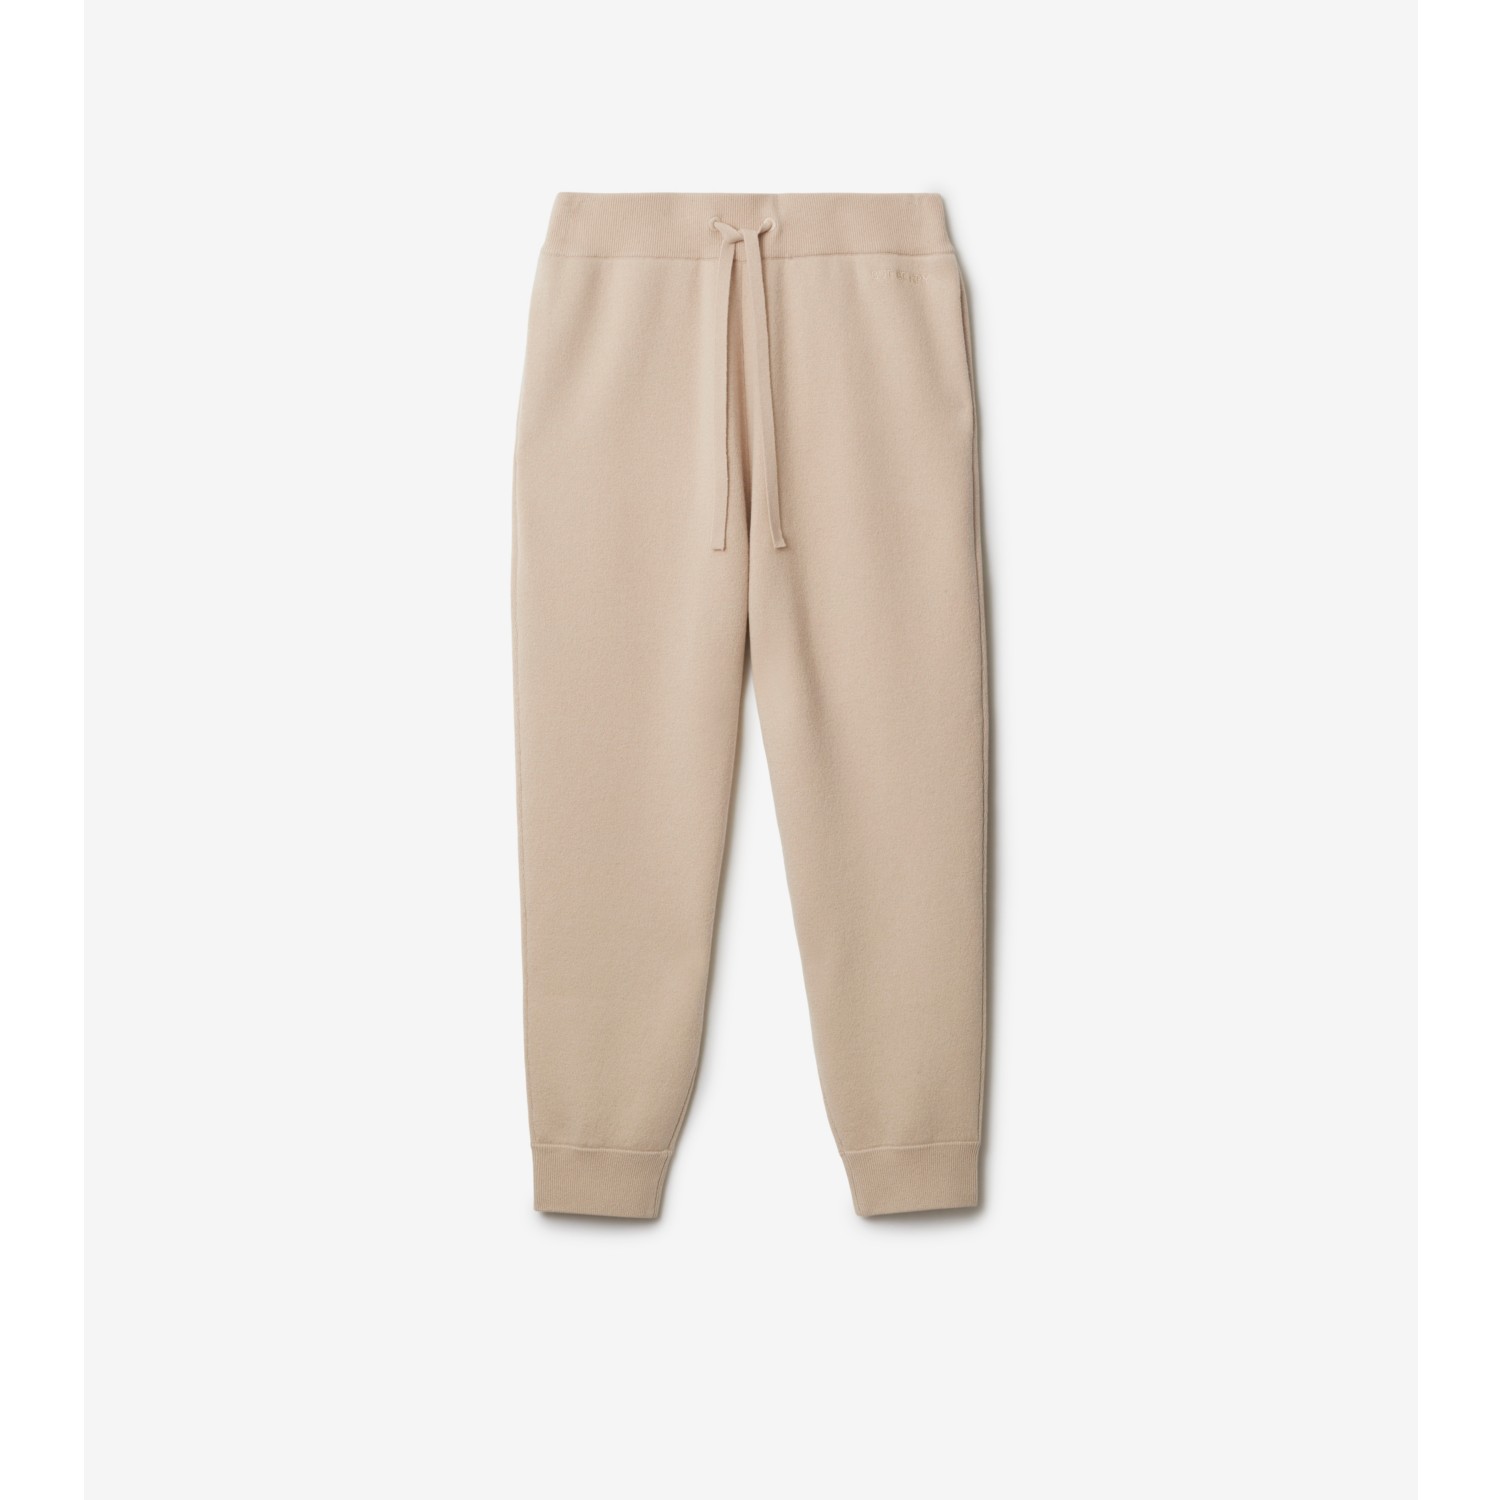 Pants with Side Slip Pockets